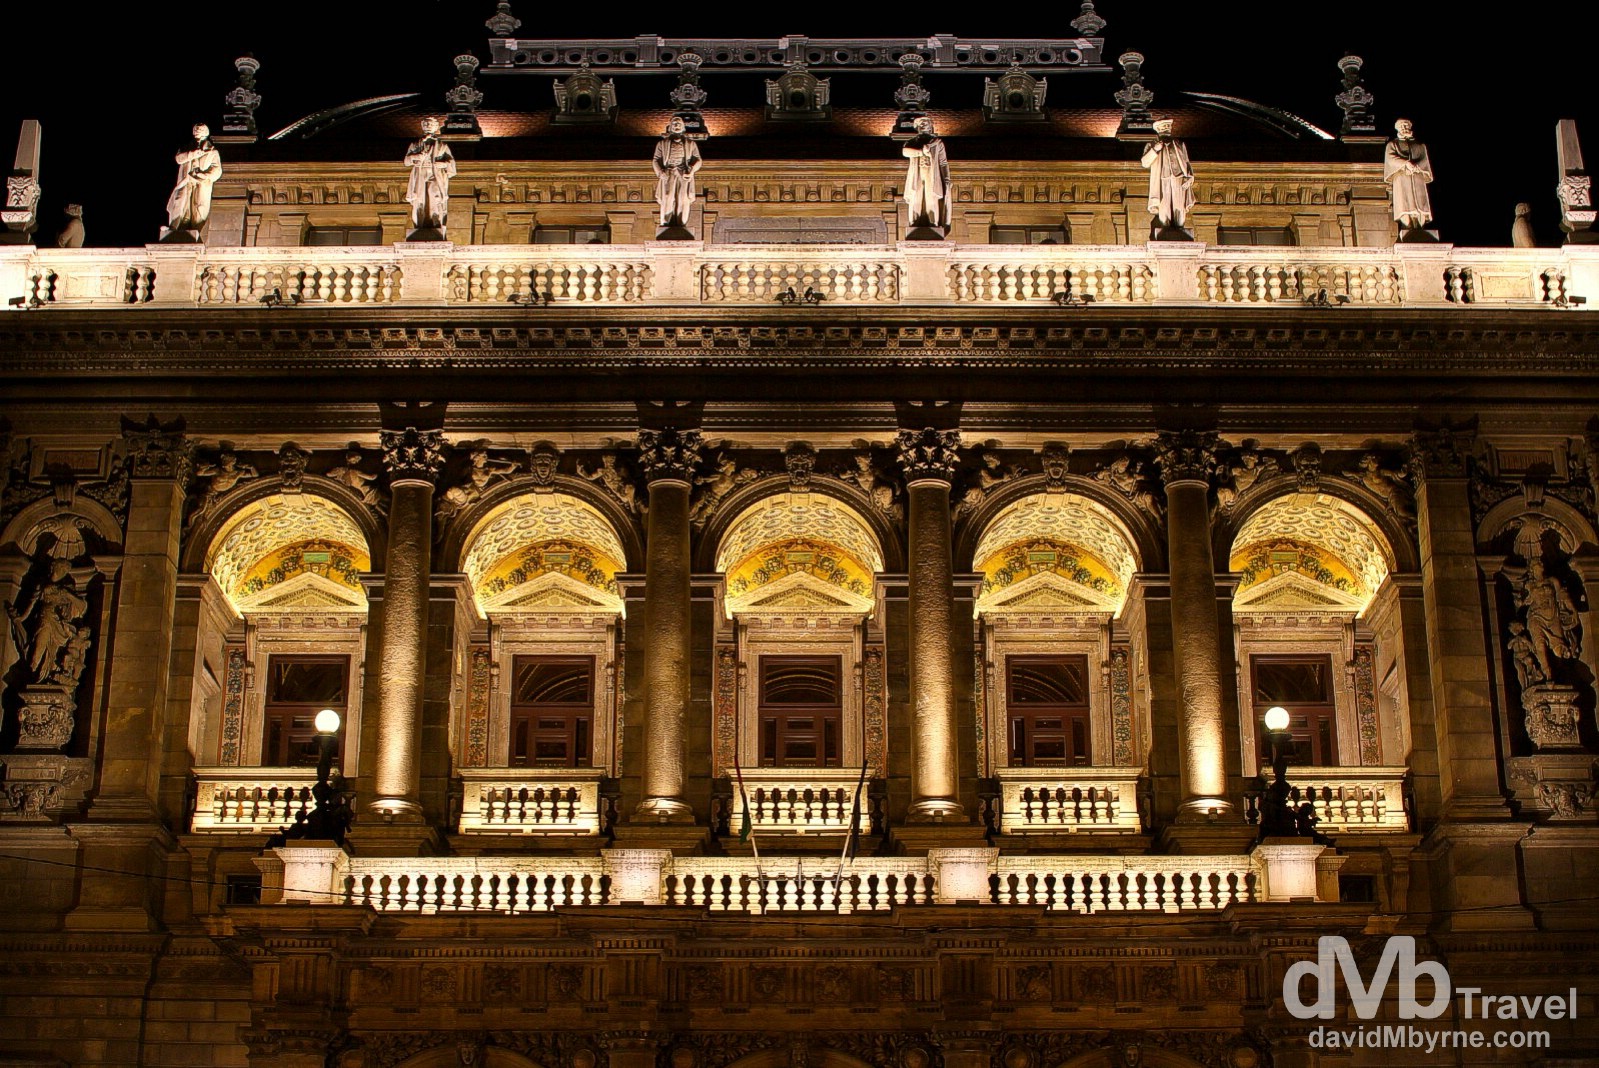 A section of the facade of Hungarian State Opera House in Budapest, Hungary. March 26, 2014.